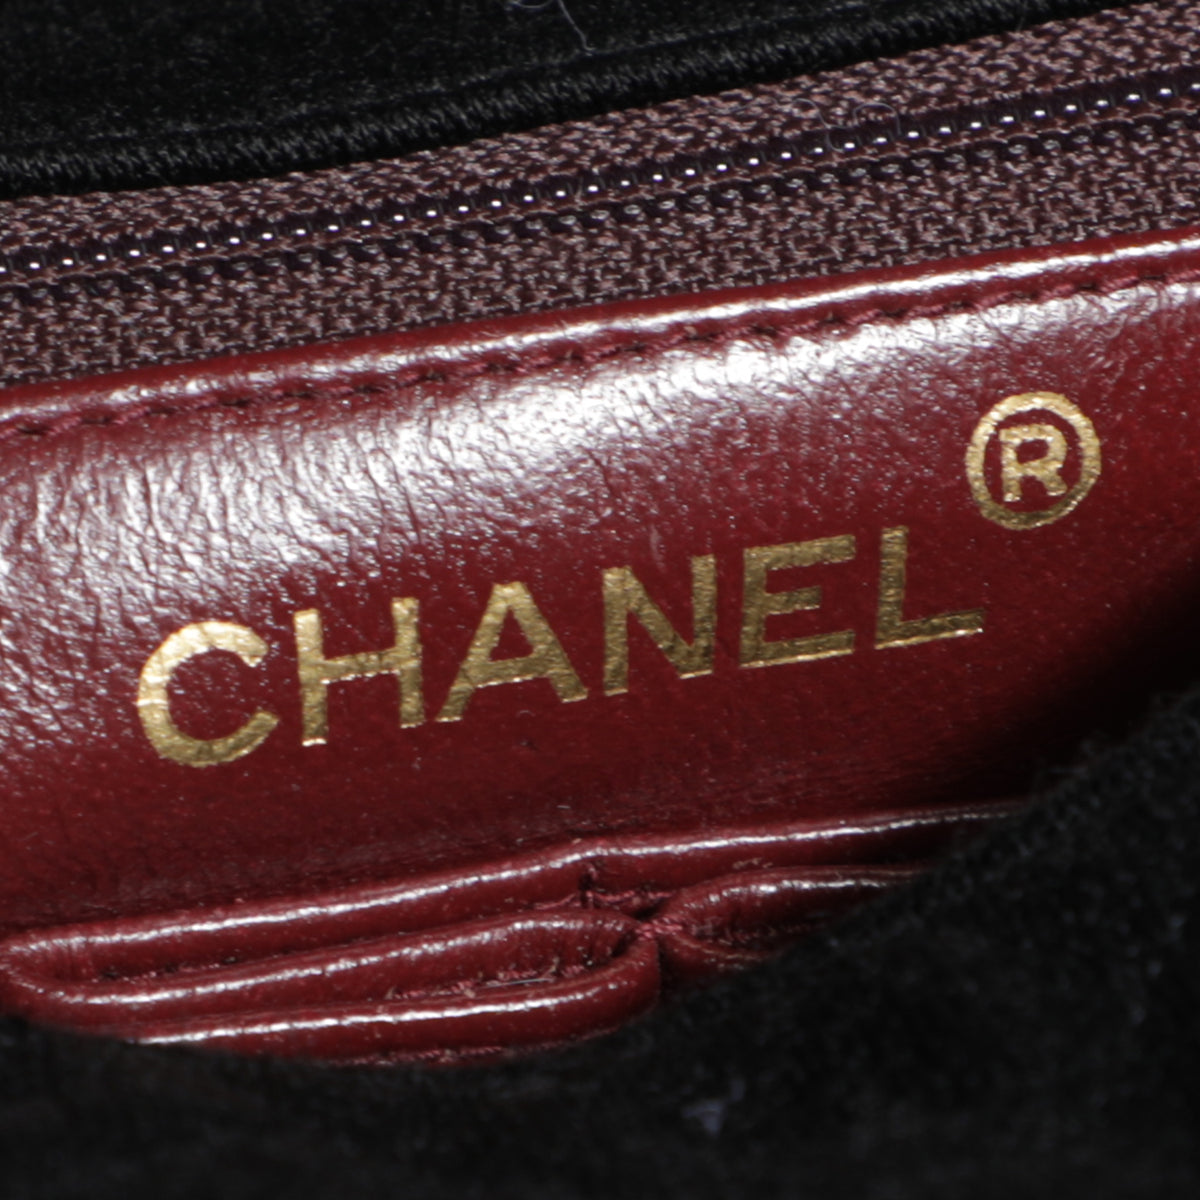 Classic Chanel Quilted Jersey Lambskin Leather 2.55